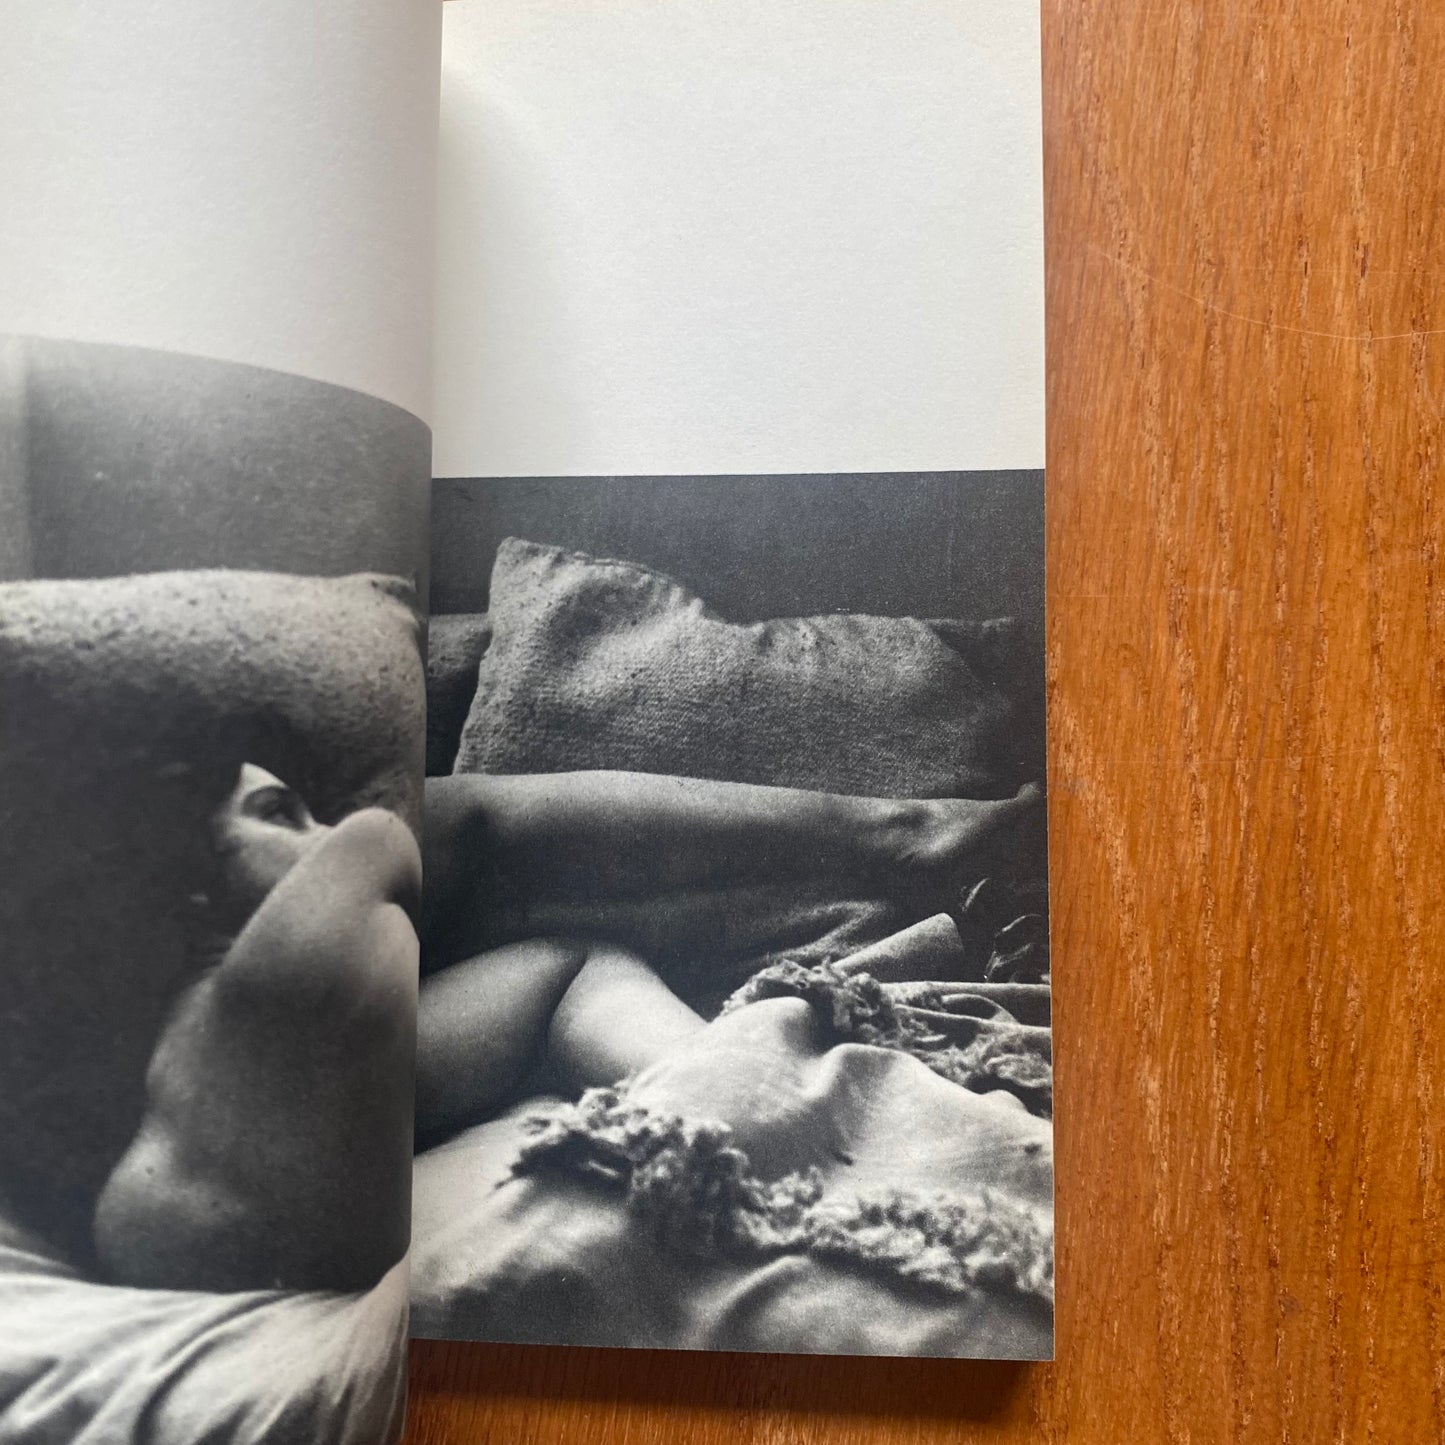 The History of the Nude in Photography - Peter Lacey